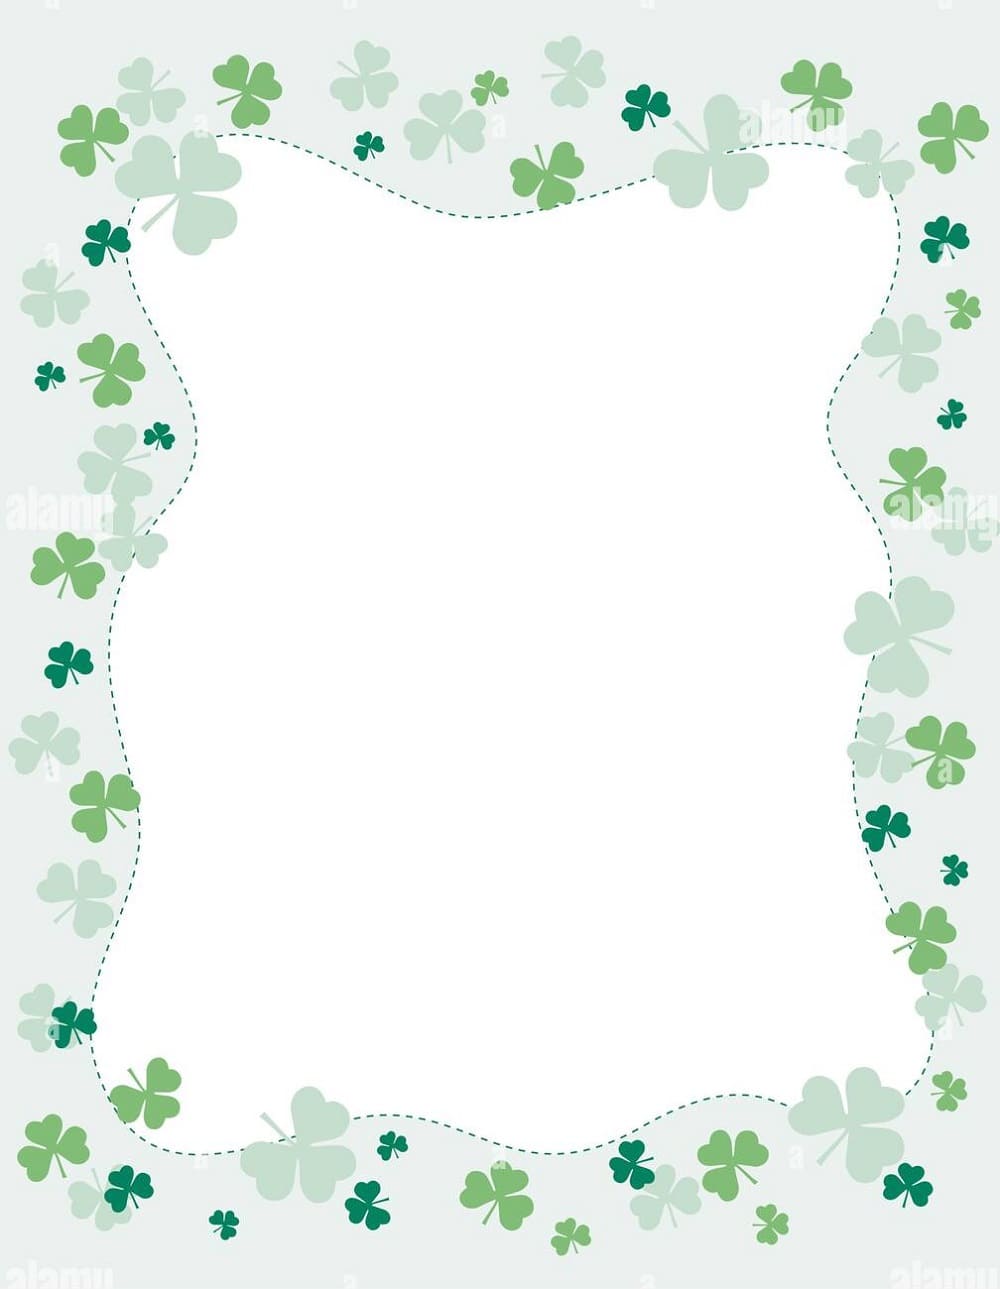 Download Picture of Saint Patrick's Day Border